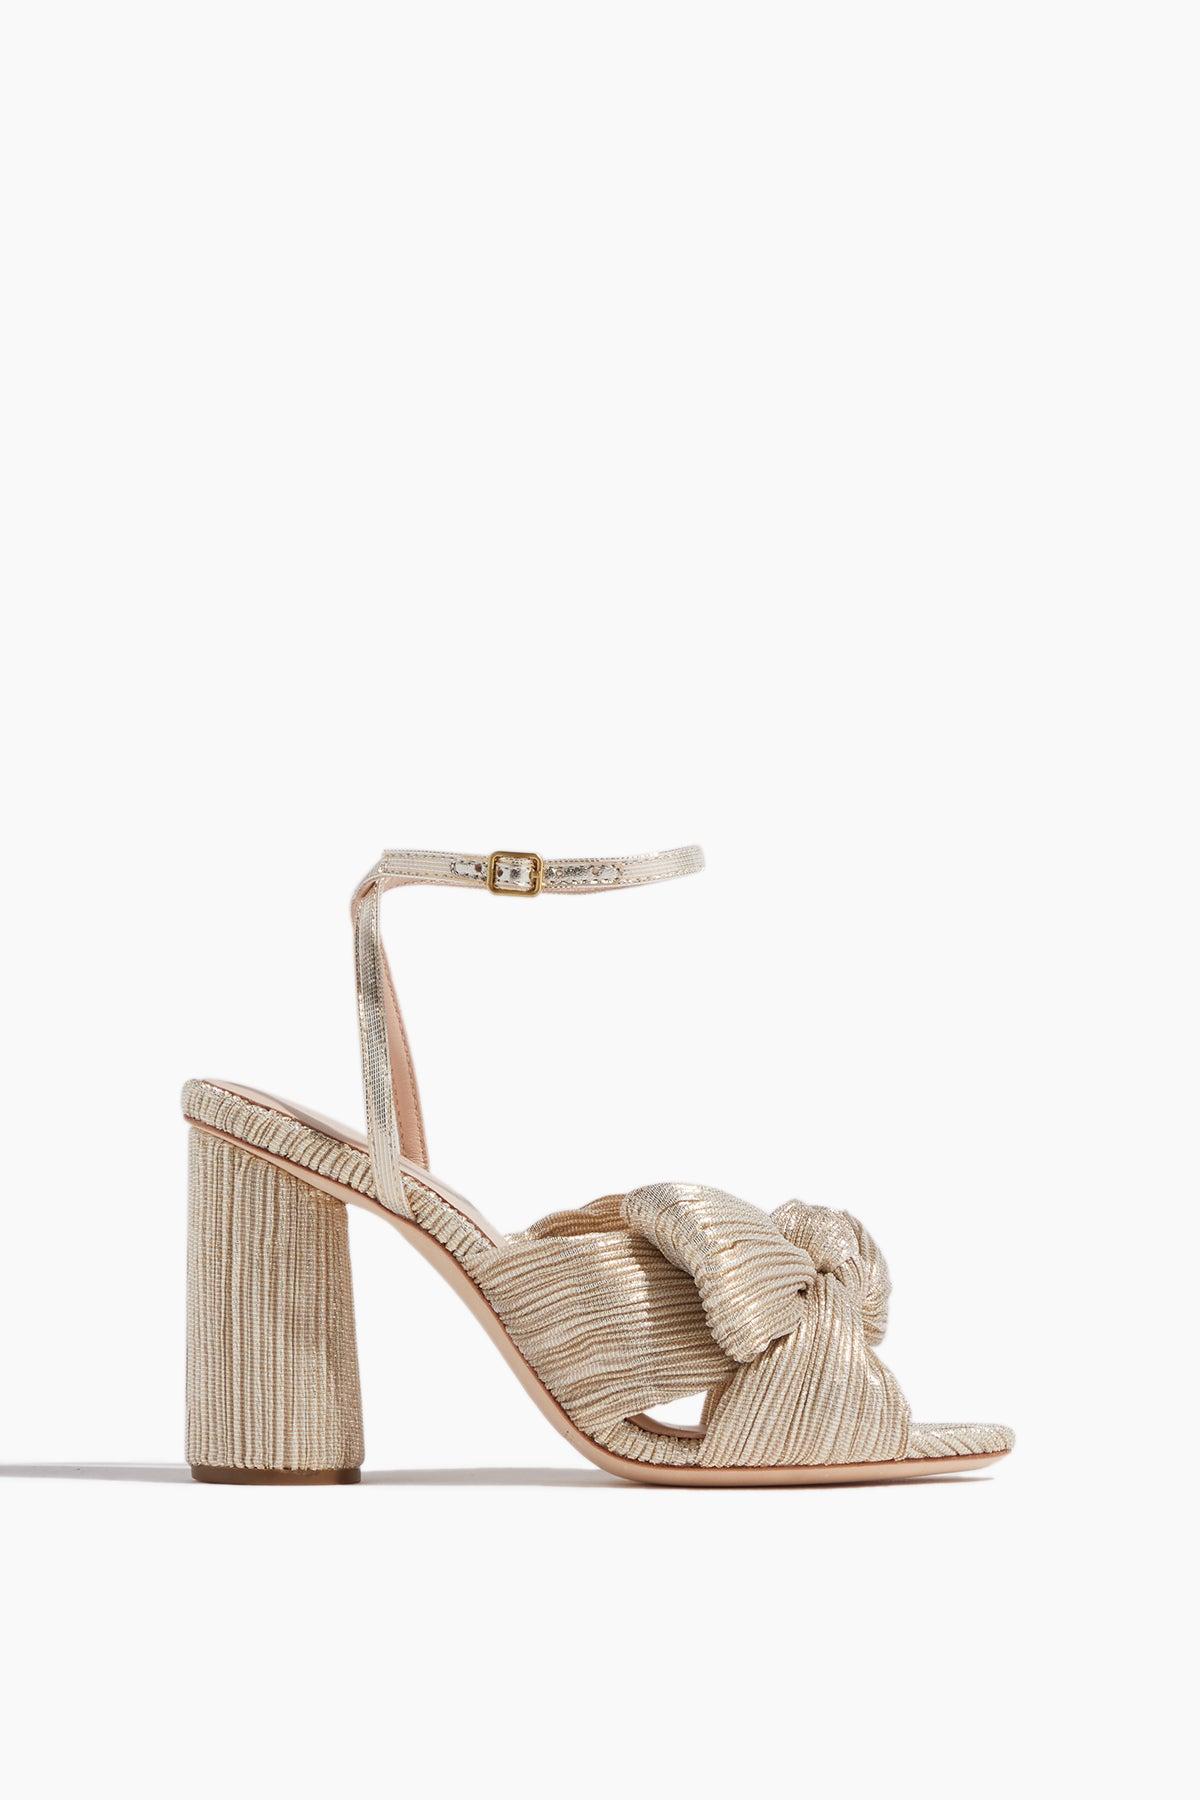 Loeffler Randall Synthetic Camellia Knot Mule With Ankle Strap in White ...